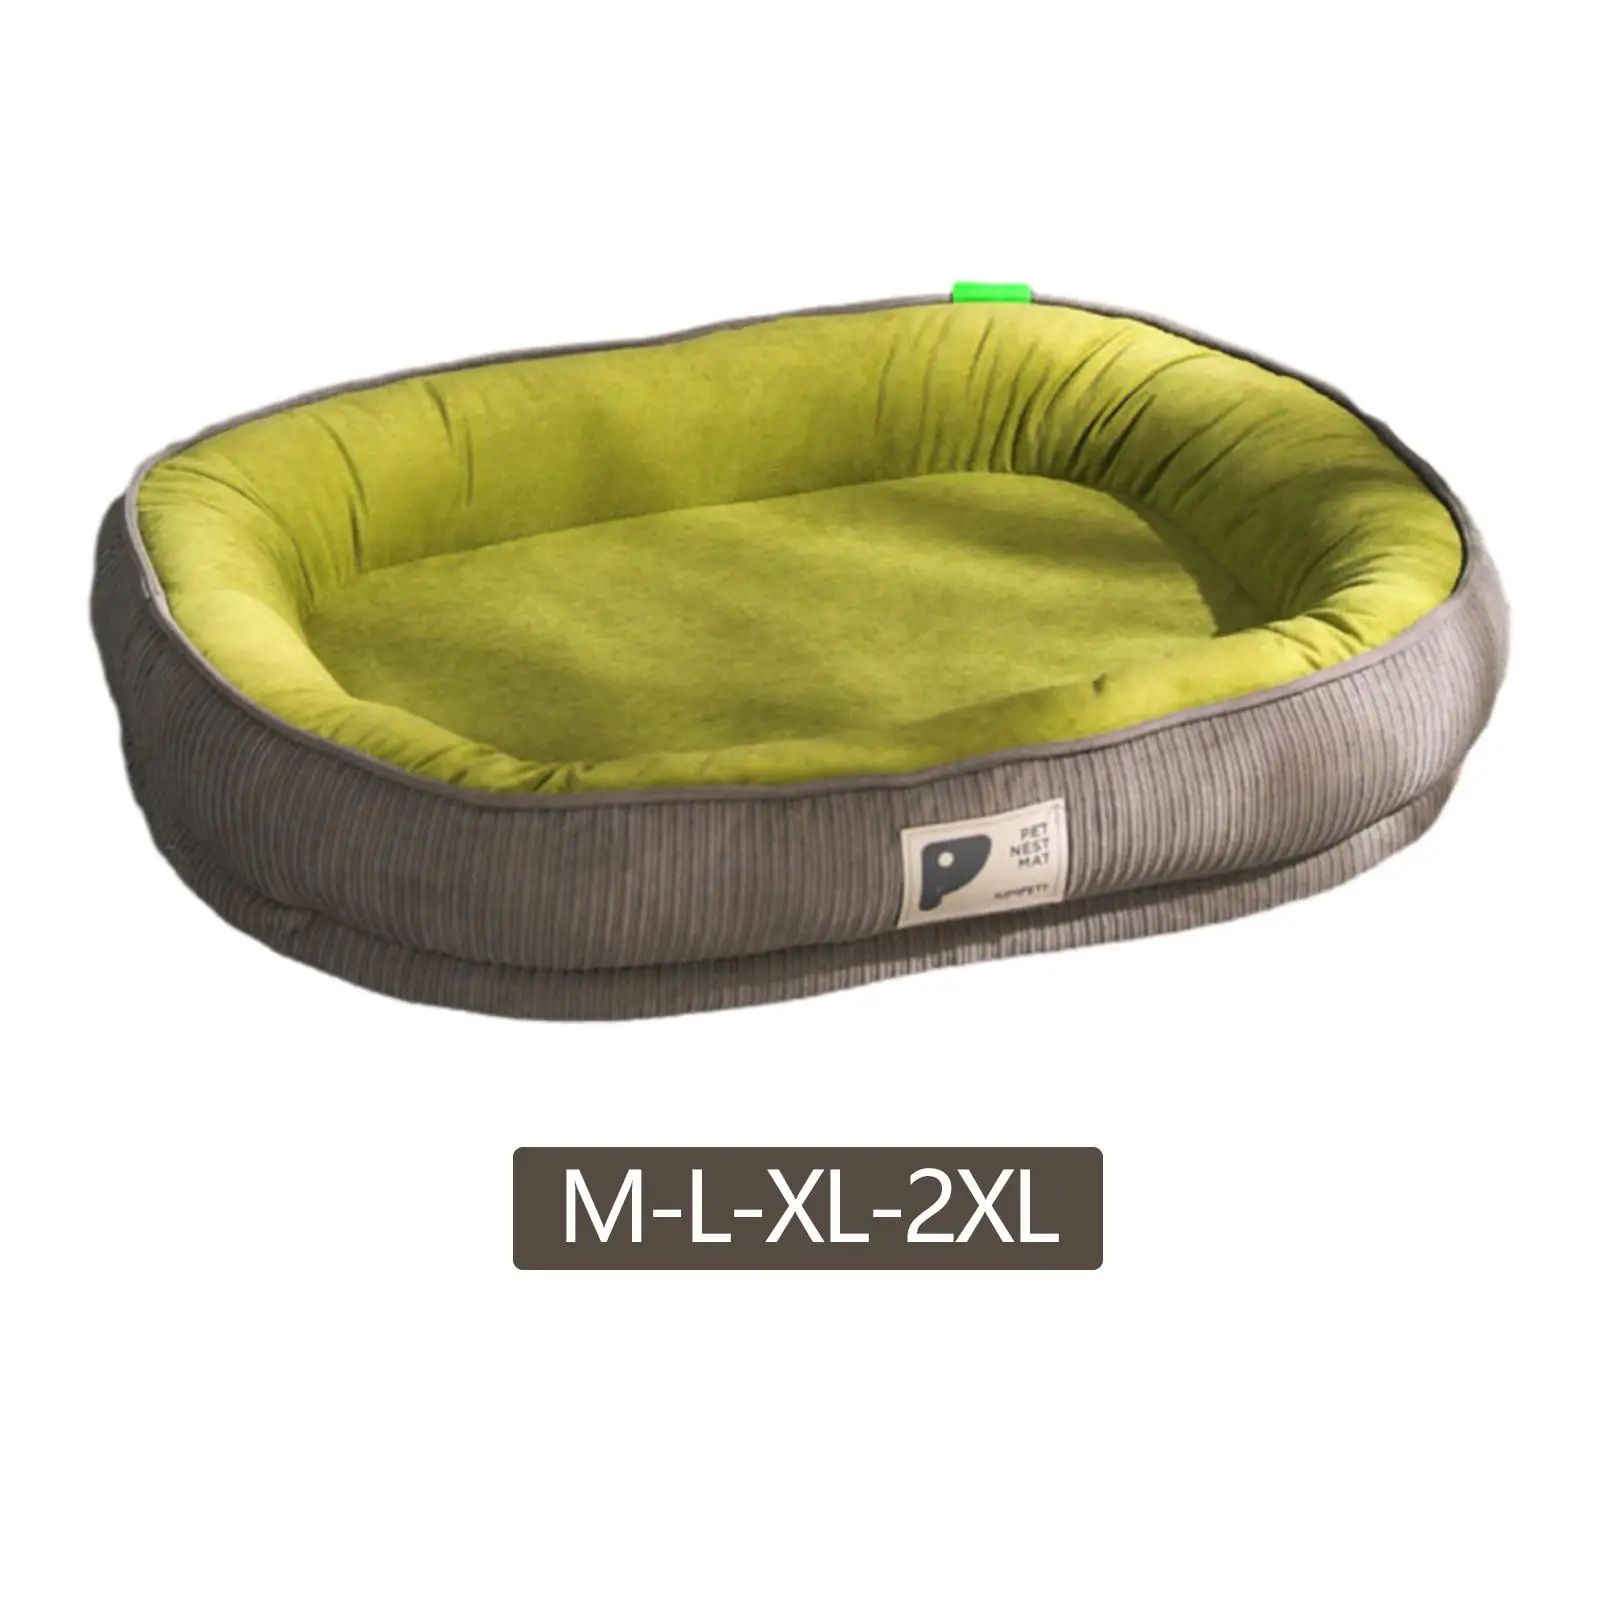 Green Gray Dog Bed Antiskid Bottom Couch Comfortable Pet Sleeping Dog Crate Bed for Large Dogs Kittens Medium Dogs Puppy Cats